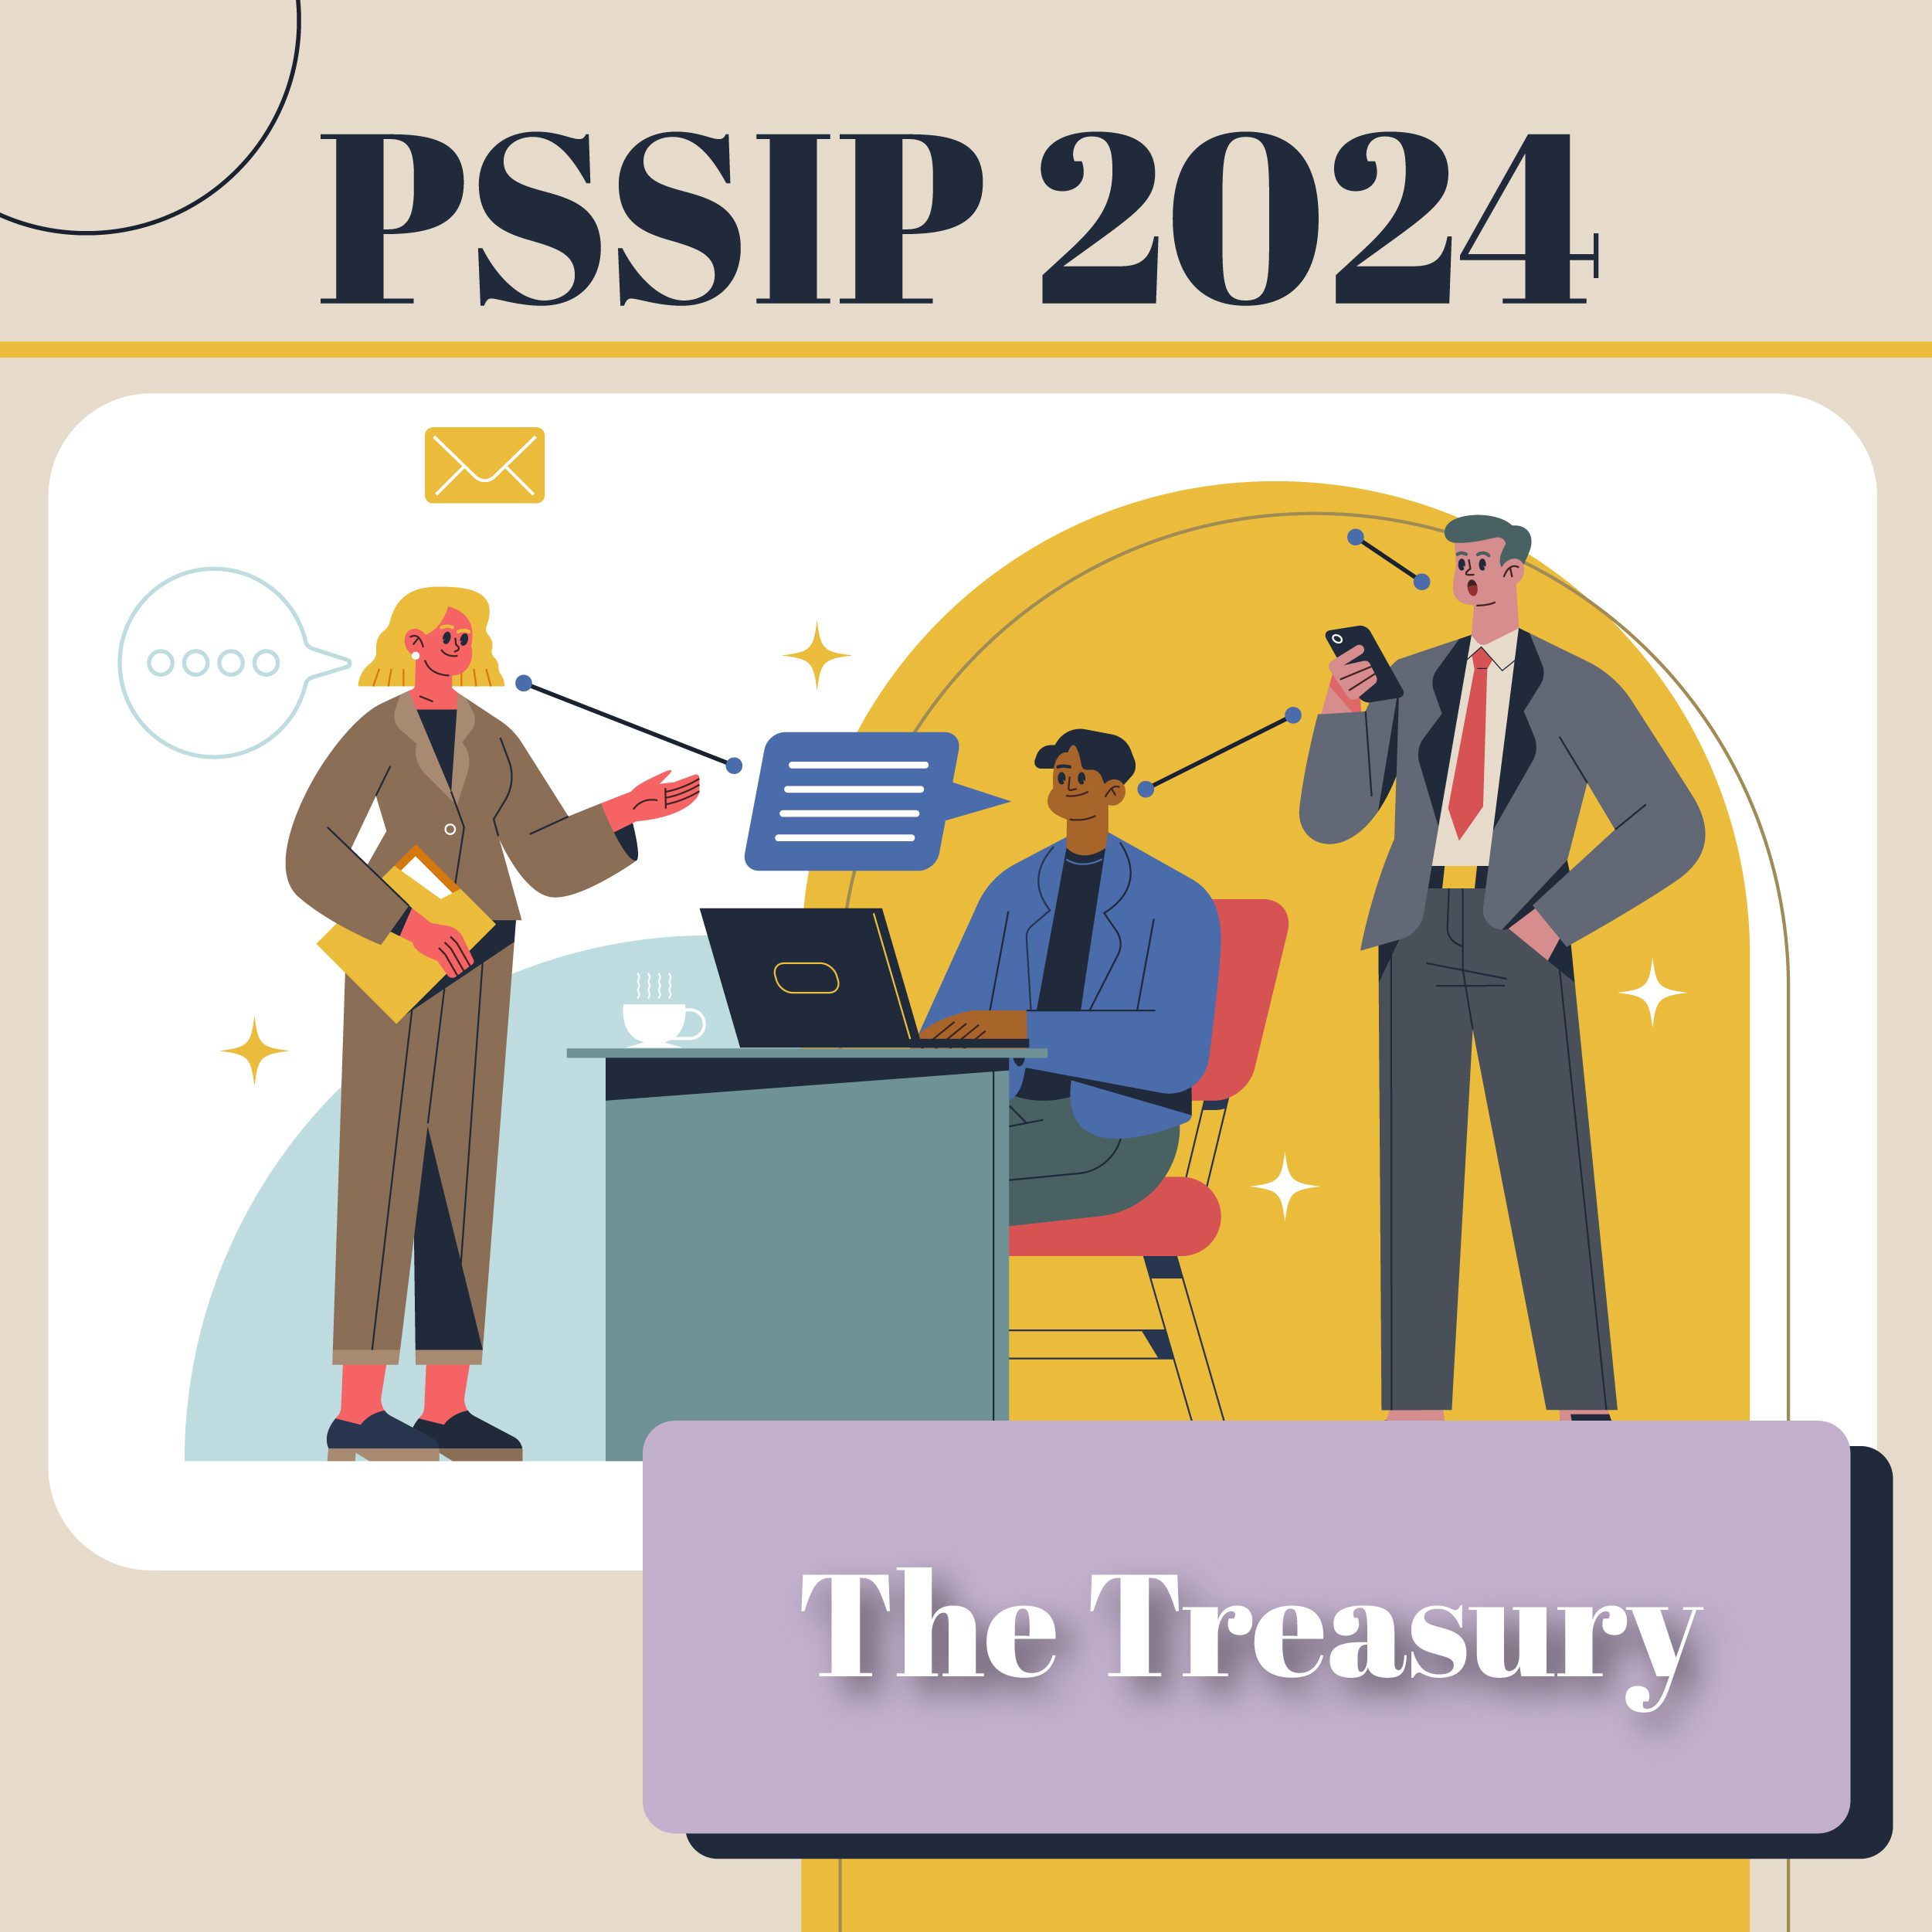 PSSIP2024 – The Treasury (3 months)